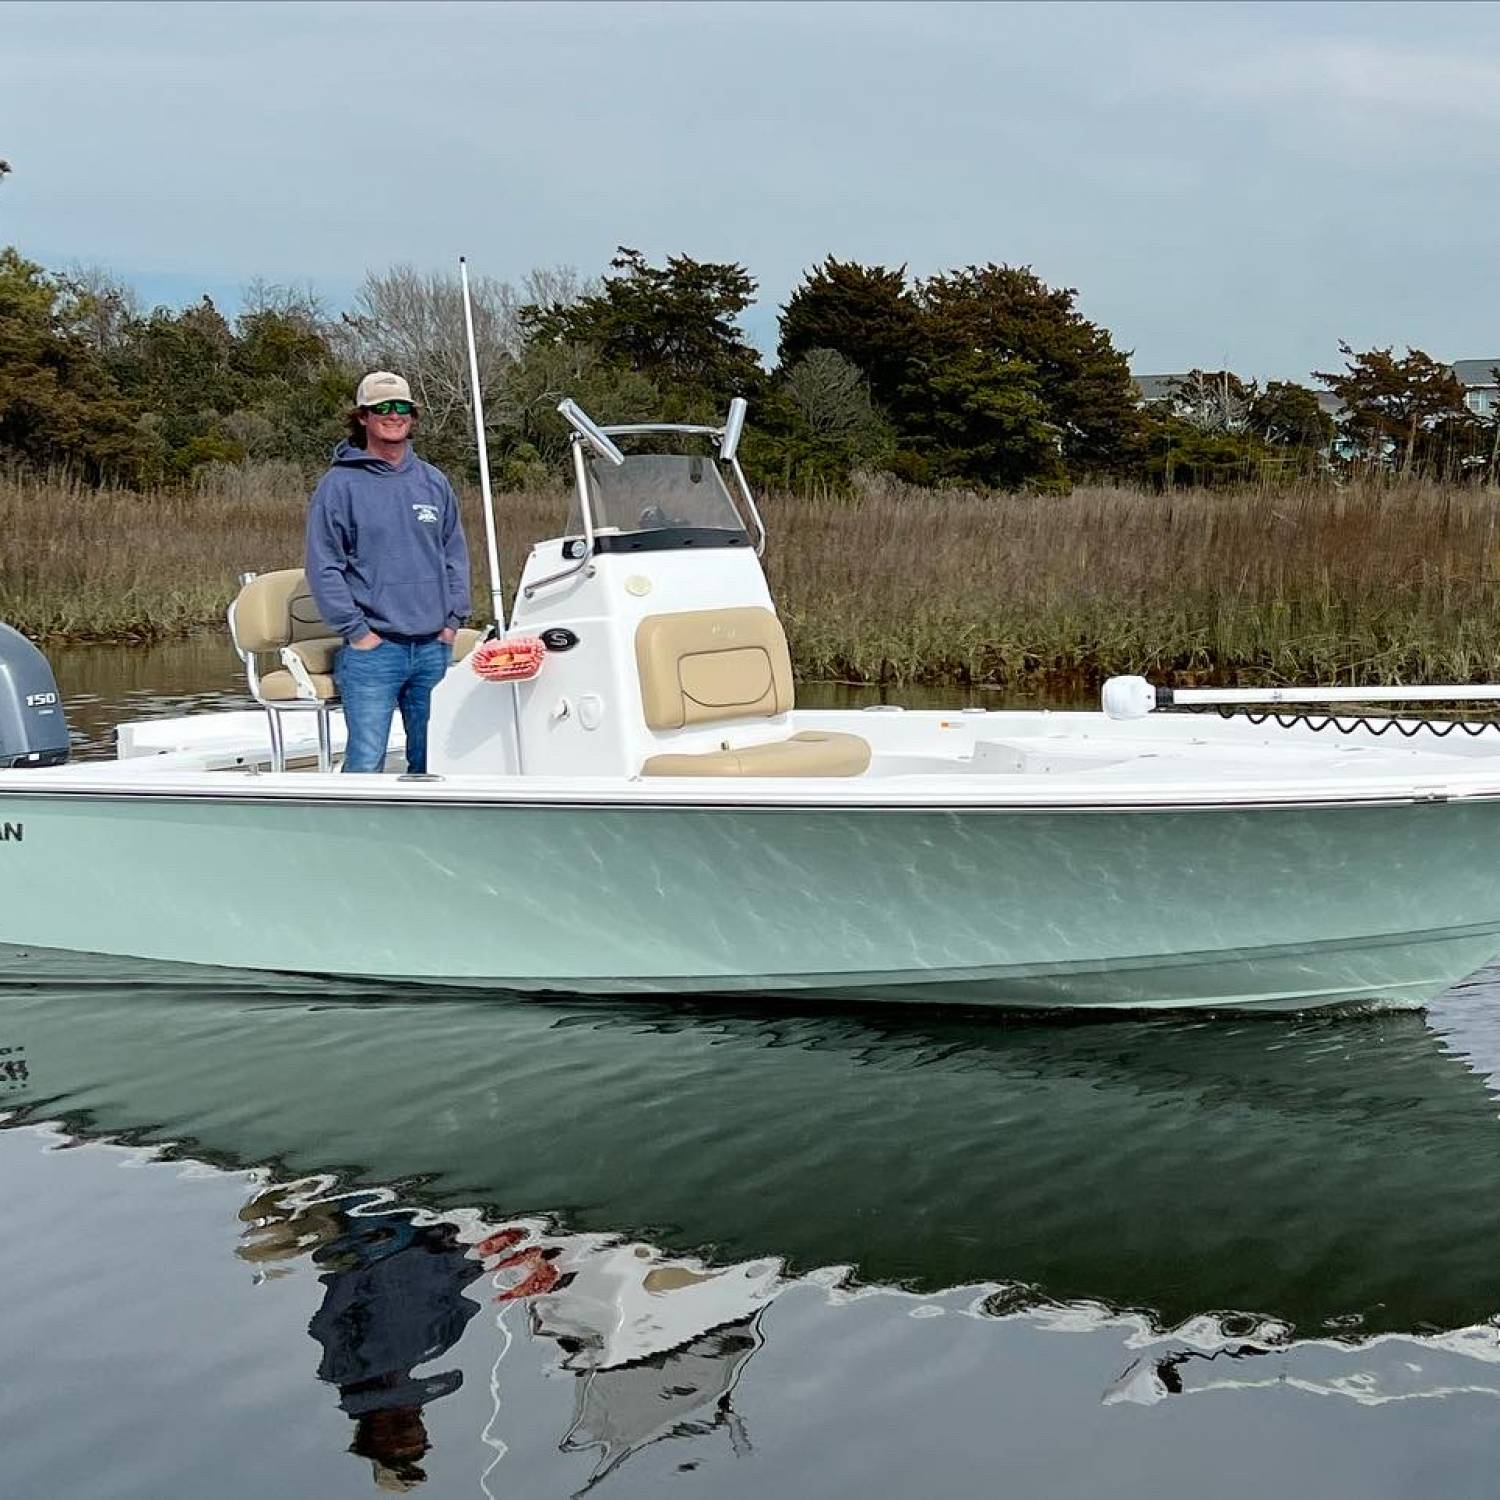 Title: 227 Sportsman Bay Boat - On board their Sportsman Masters 227 Bay Boat - Location: Oak Island NC. Participating in the Photo Contest #SportsmanApril